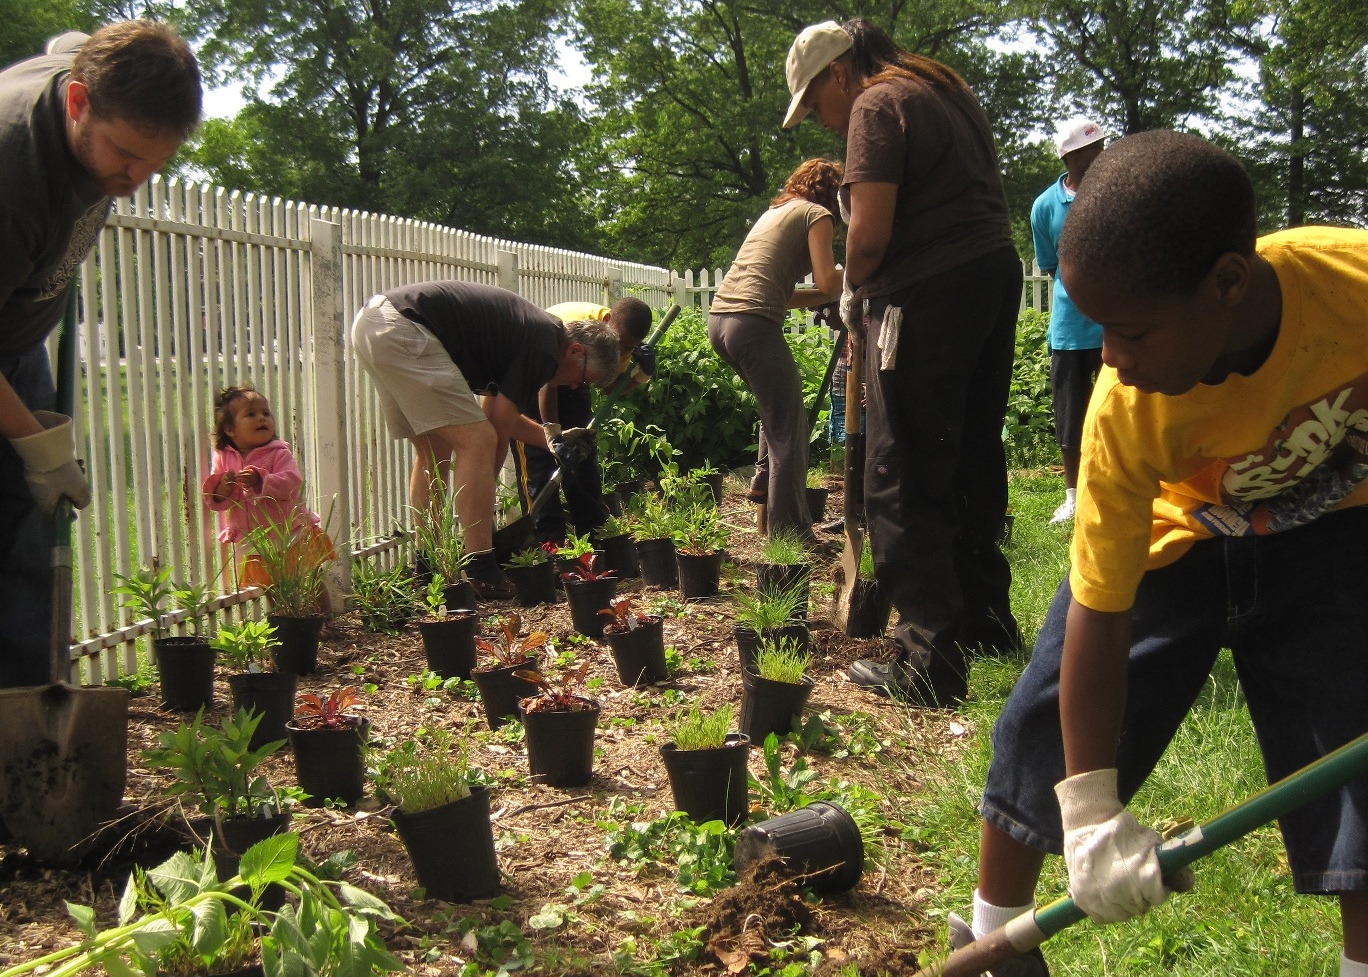 Volunteers in action at Woodford Orchard in Strawberry Mansion. | Philadelphia Orchard Project